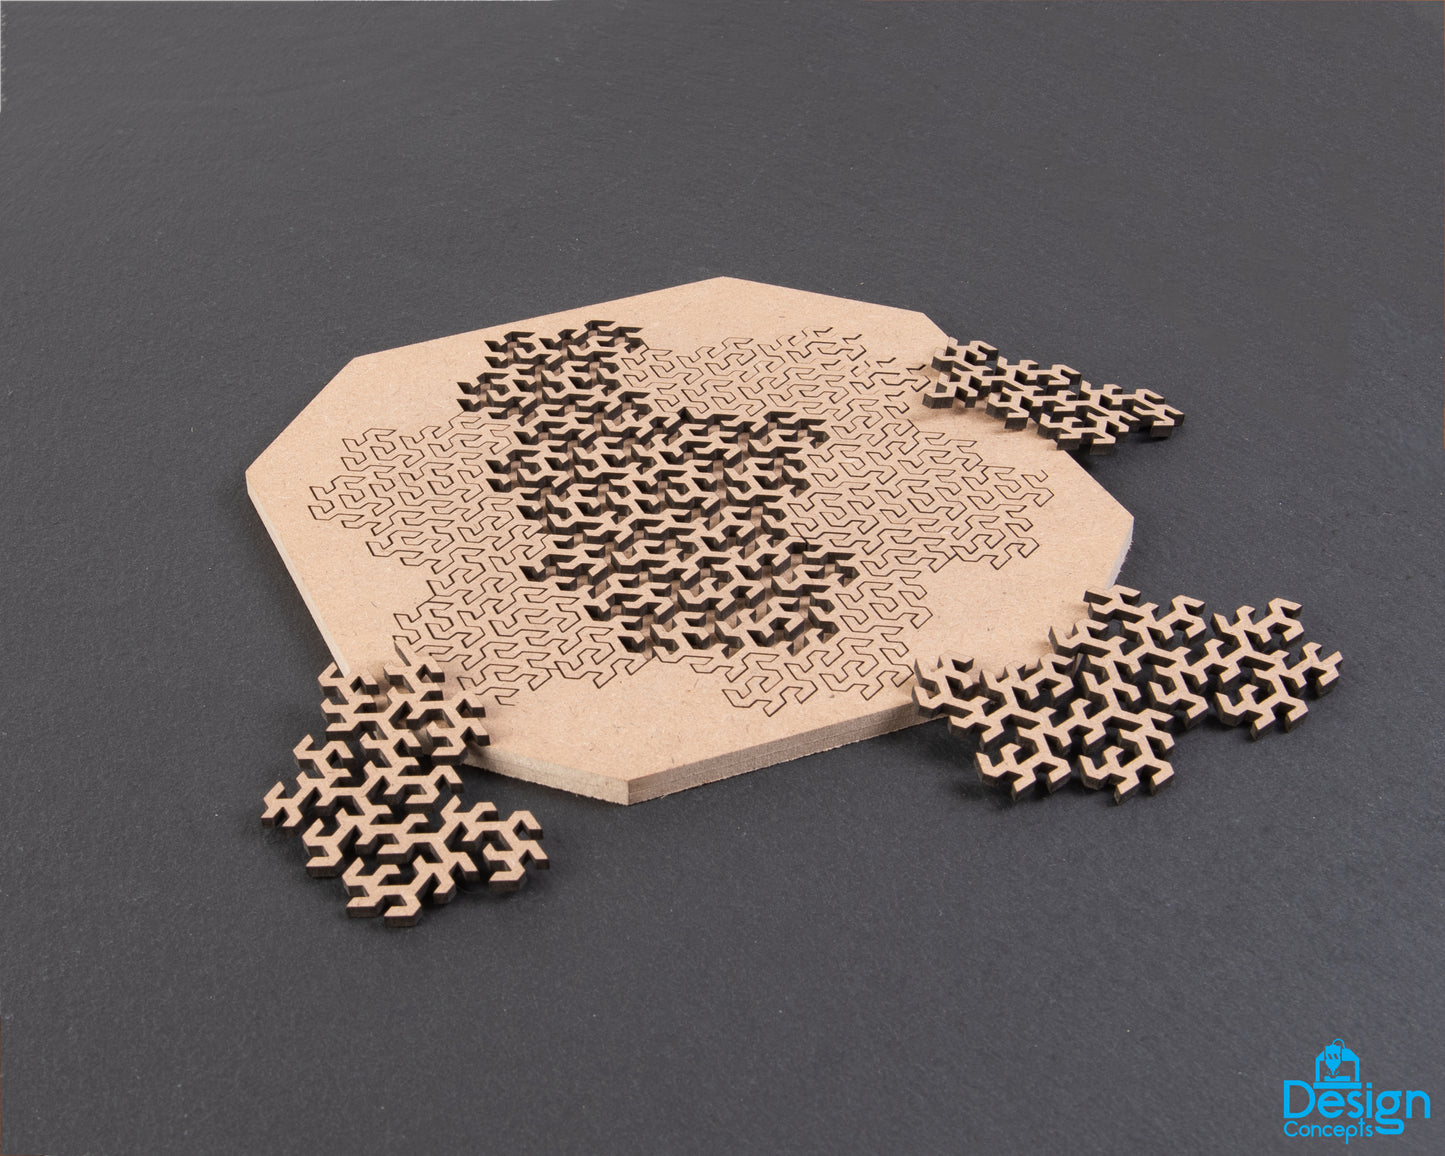 Fractal Jigsaw Puzzle (14-Piece Jagged Version) - Design Concepts Chi